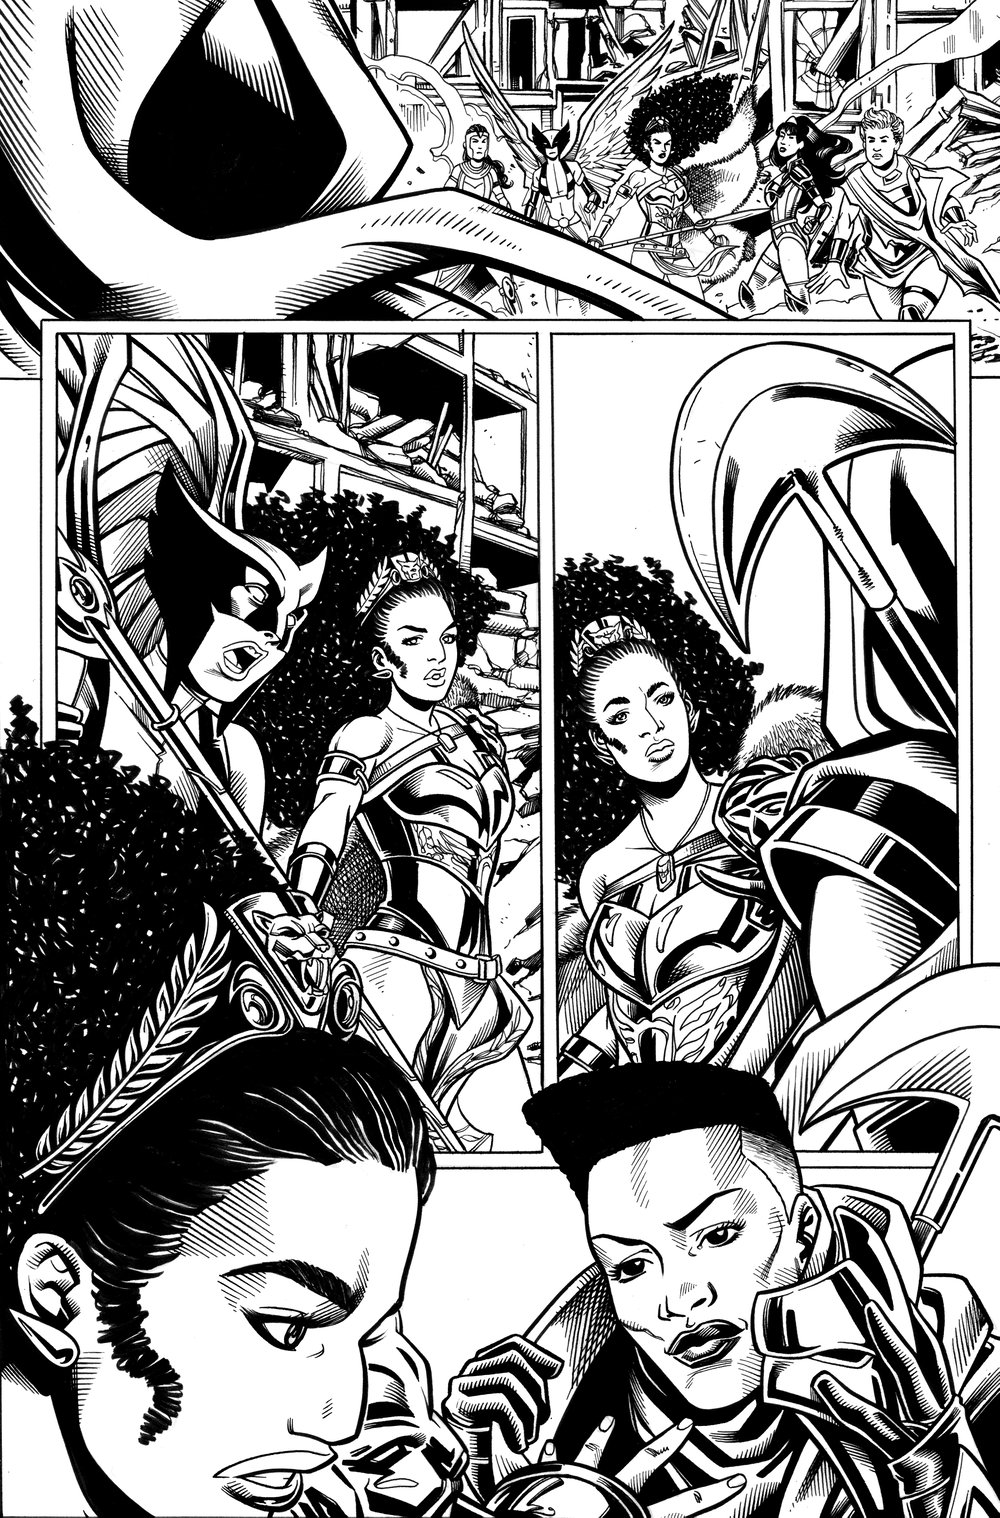 Image of Nubia: Queen of the Amazons #2 PG 22